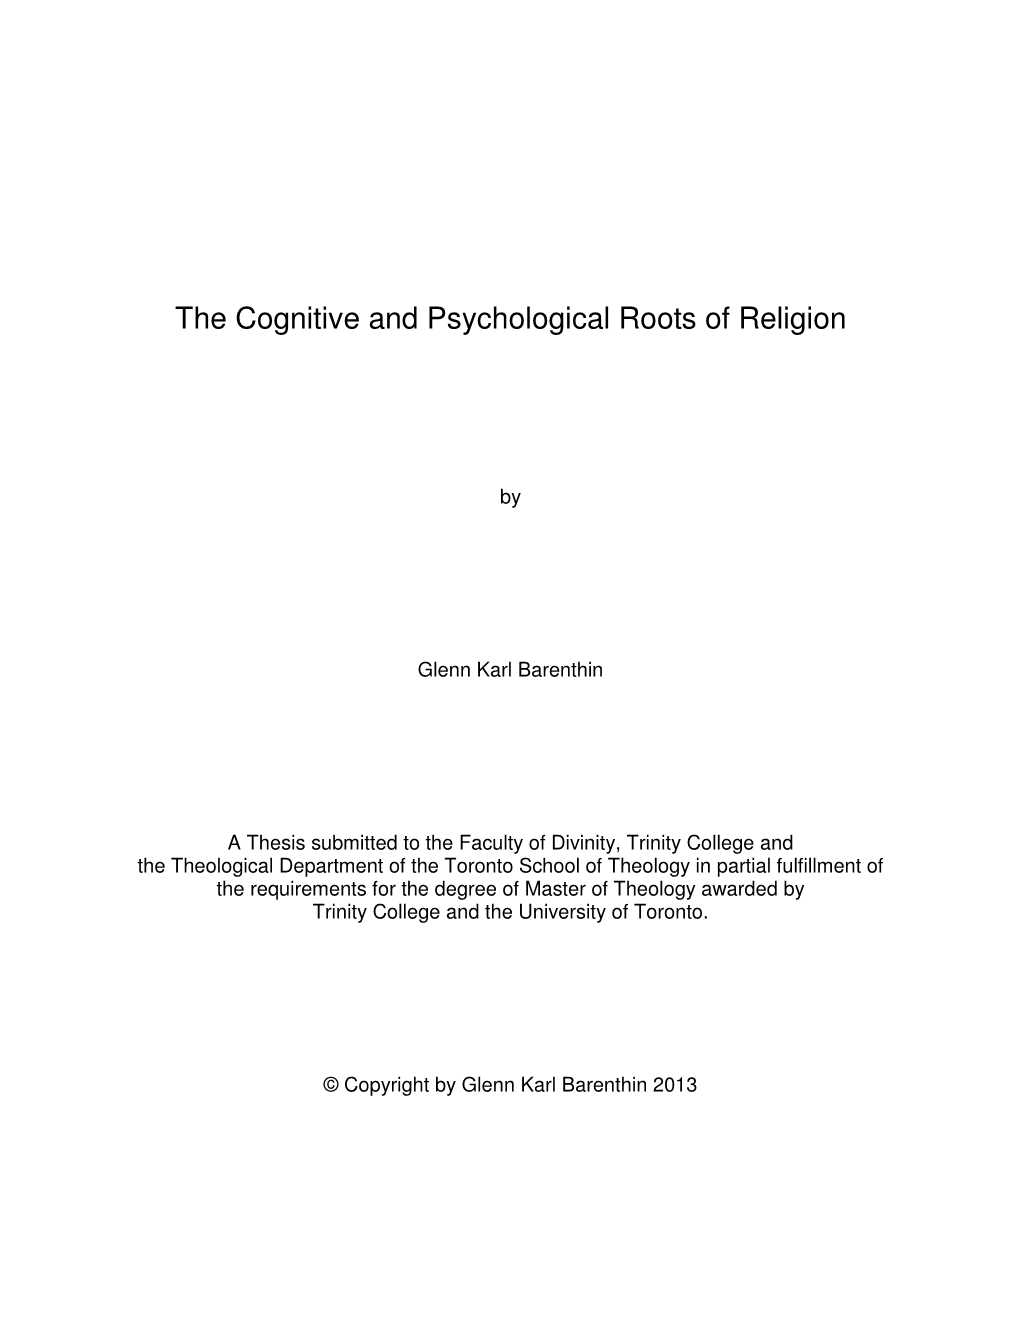 The Cognitive and Psychological Roots of Religion